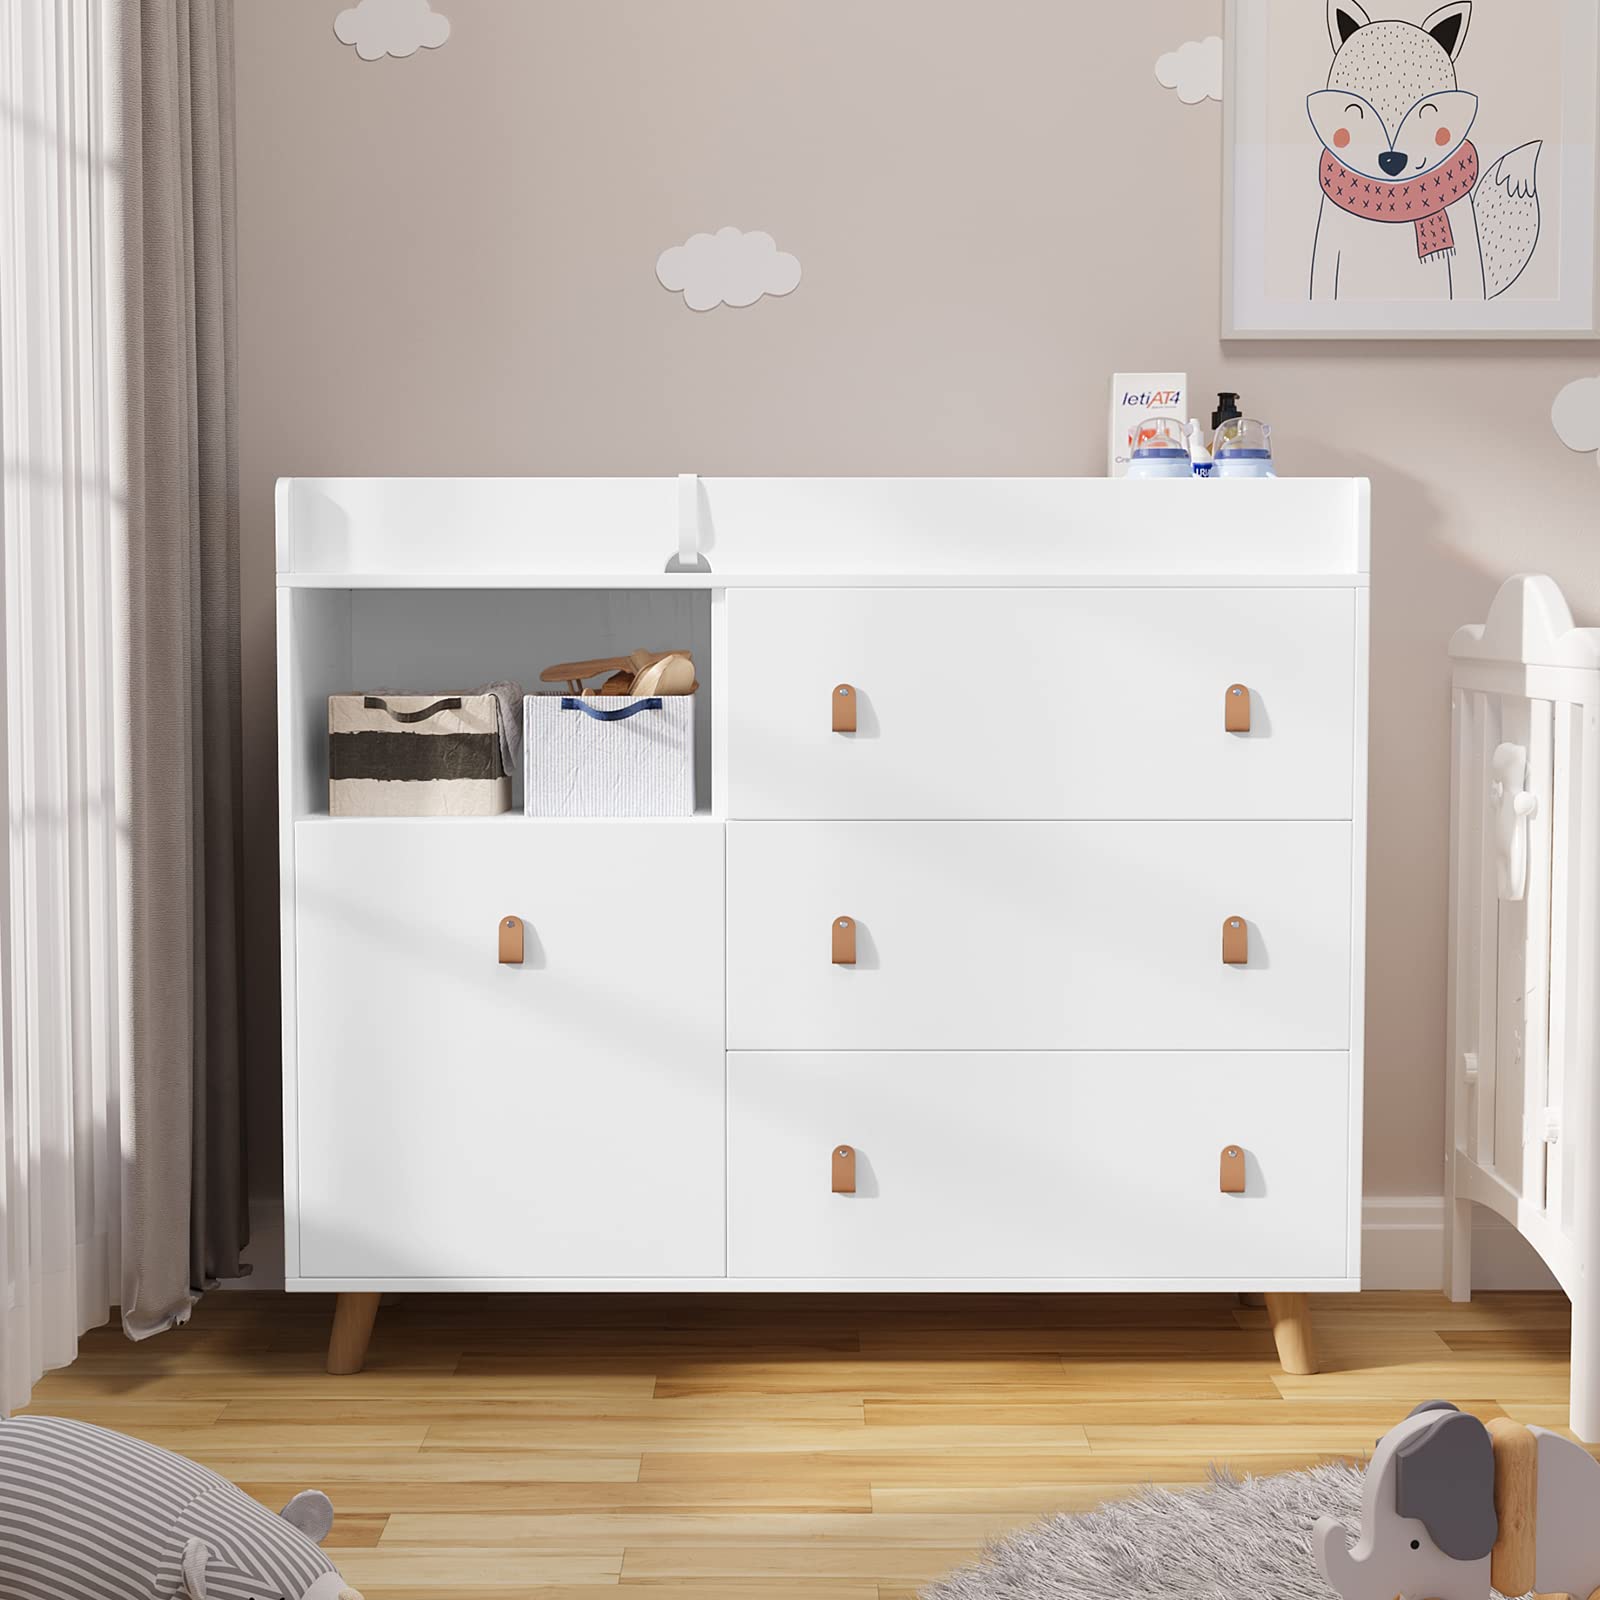 Timechee Baby Changing Table Dresser, Modern Nursery Changing Dresser Chest with 3 Drawers & 1 Shelf, Diaper Changing Pad, Storage Changing Dresser (White)